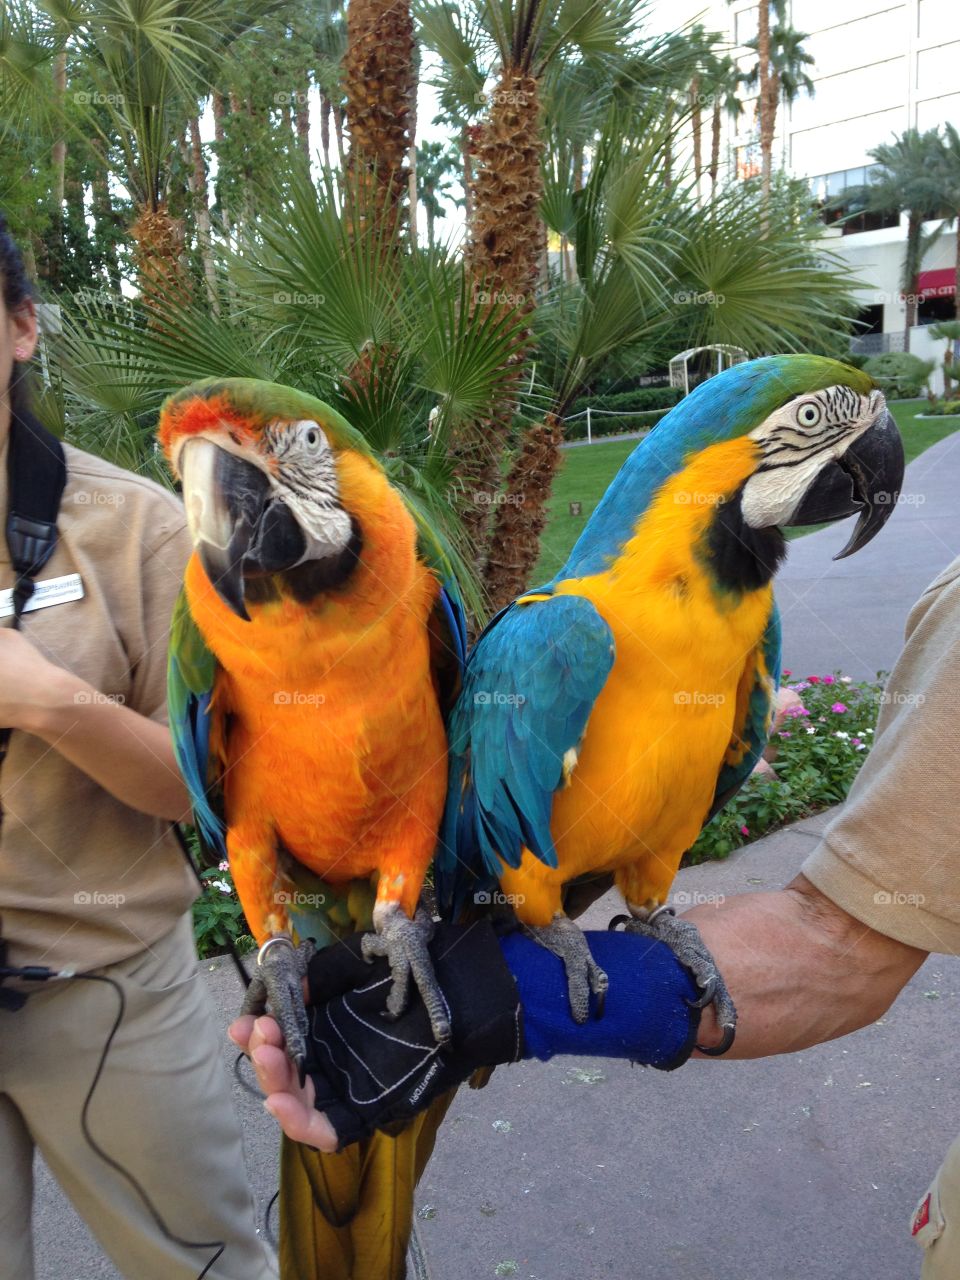 More than just yellow. Colorful parrots